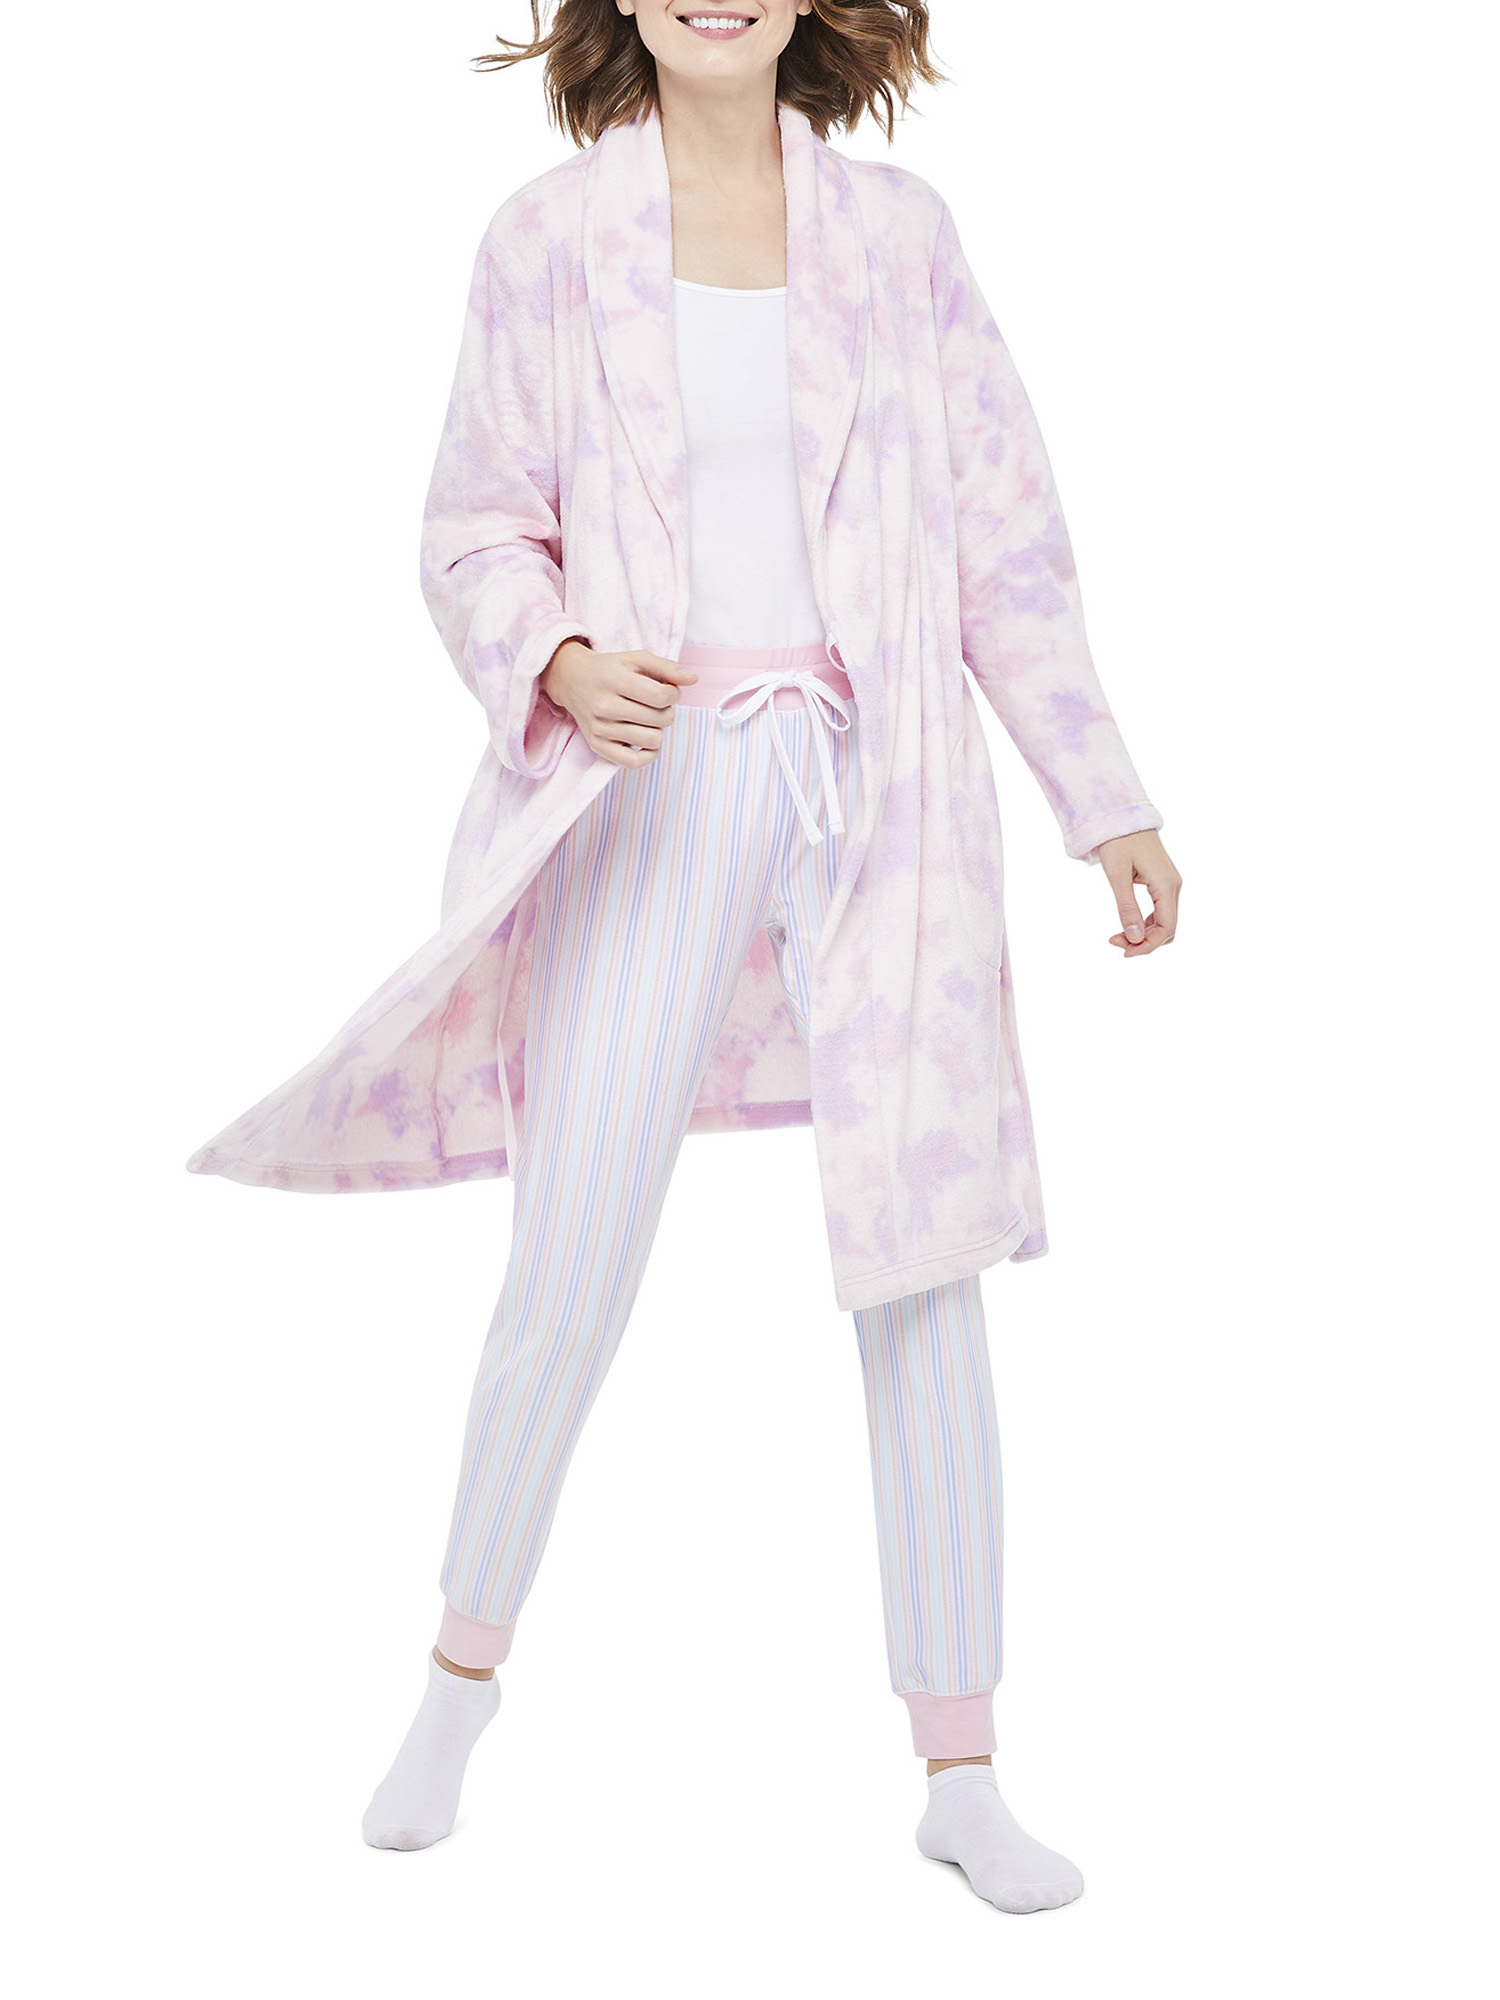 George Women's and Women's Plus Robe - image 4 of 6